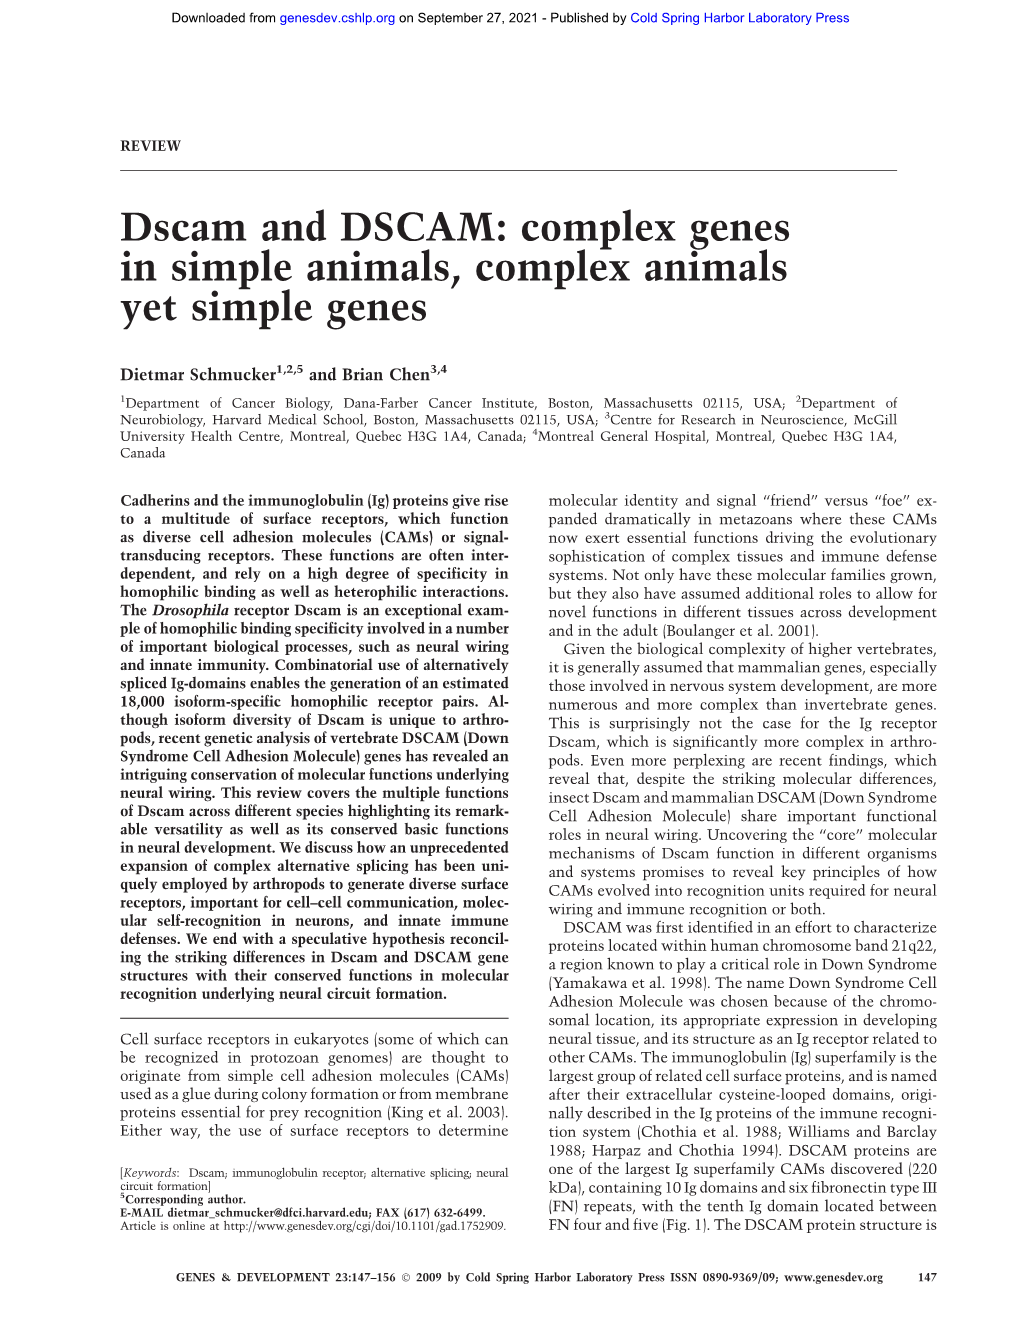 Dscam and DSCAM: Complex Genes in Simple Animals, Complex Animals Yet Simple Genes